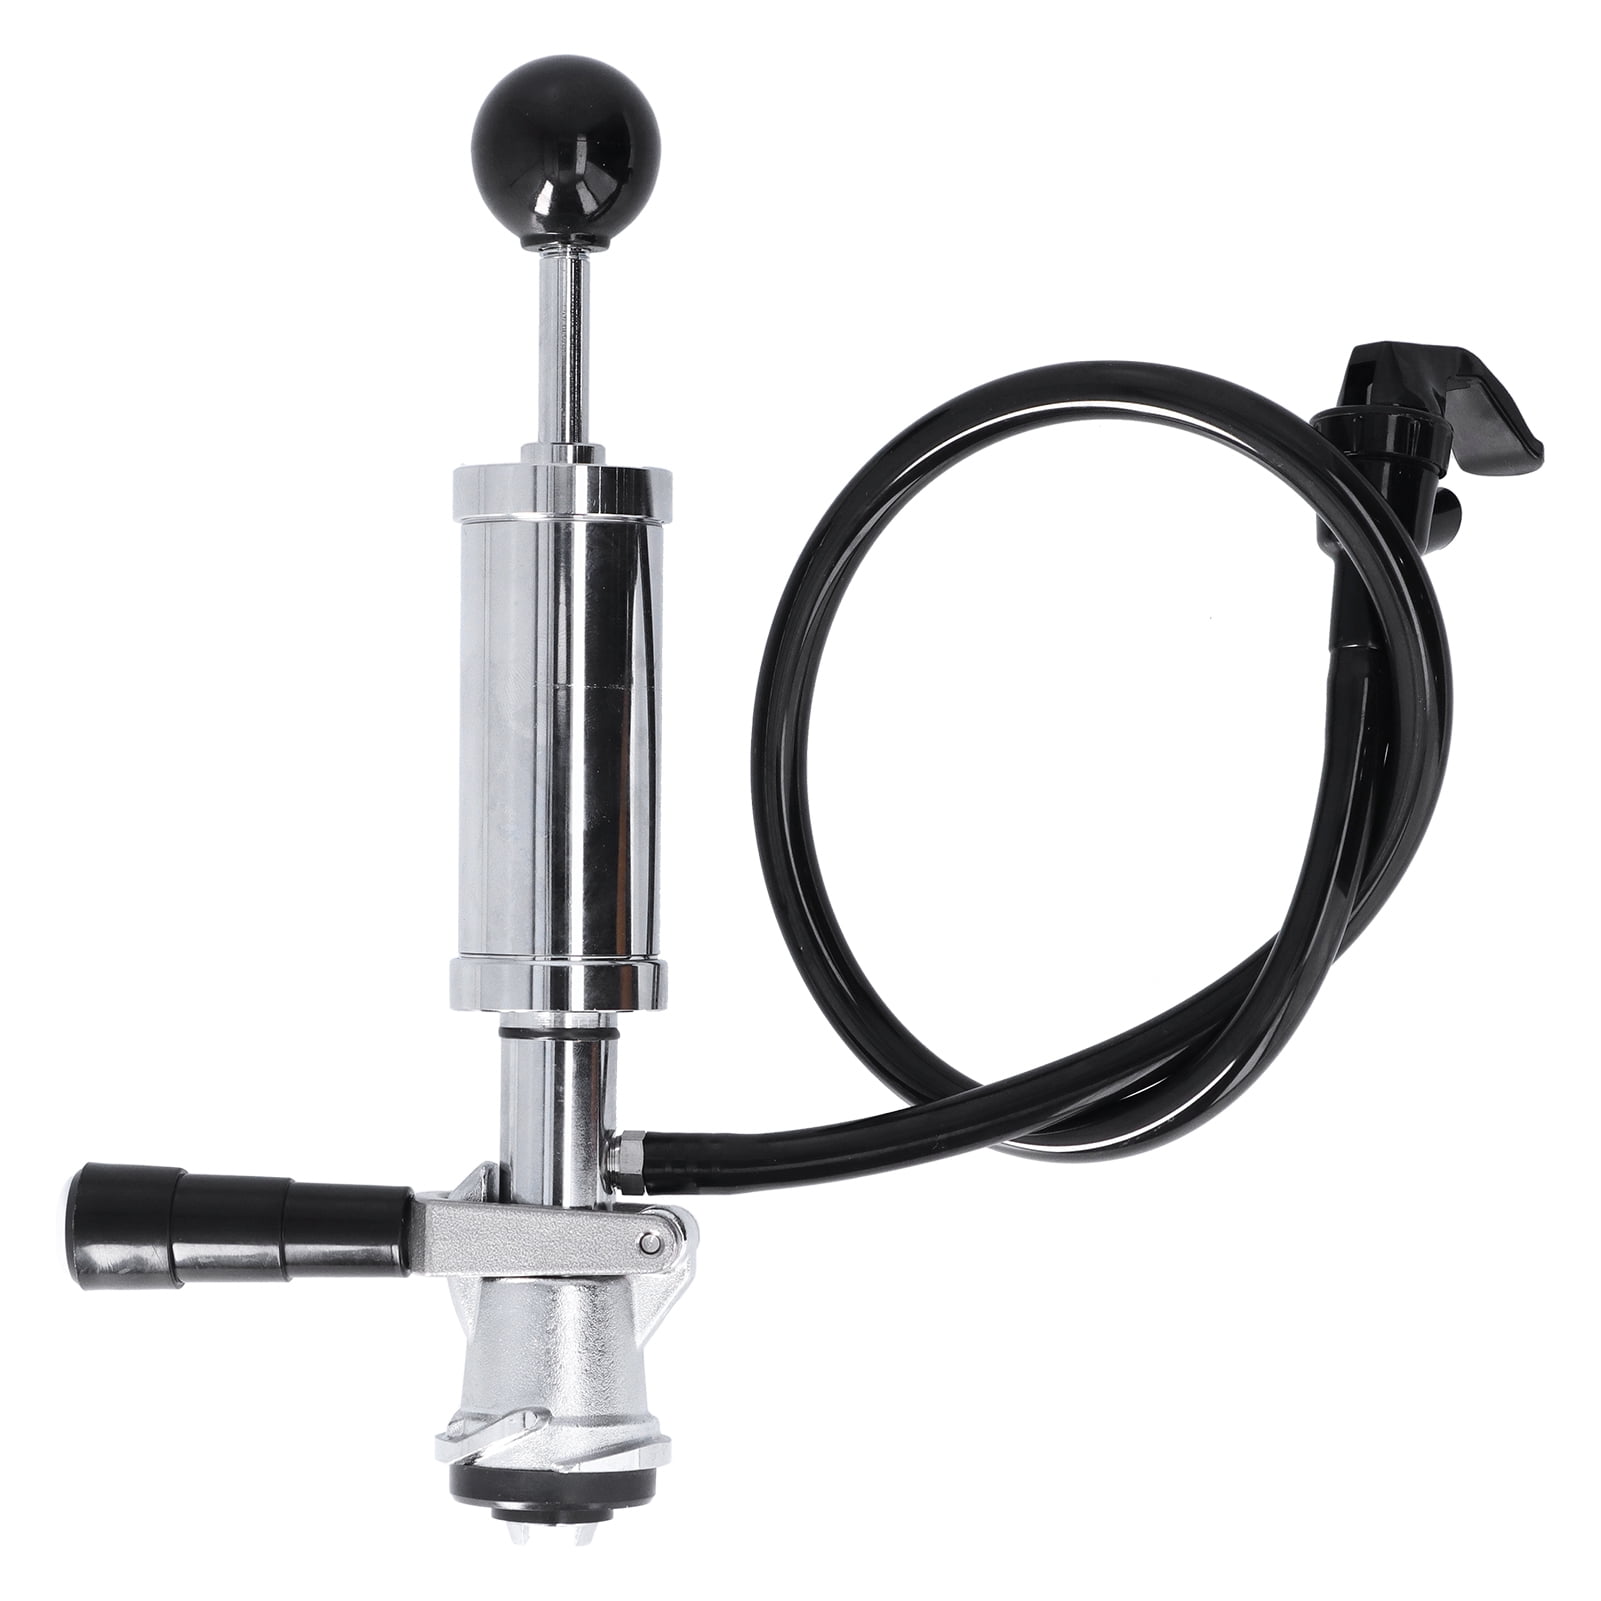 Bev Rite Heavy Duty Complete D-system Beer Party Pump Picnic Keg Tap 8-inch for sale online 